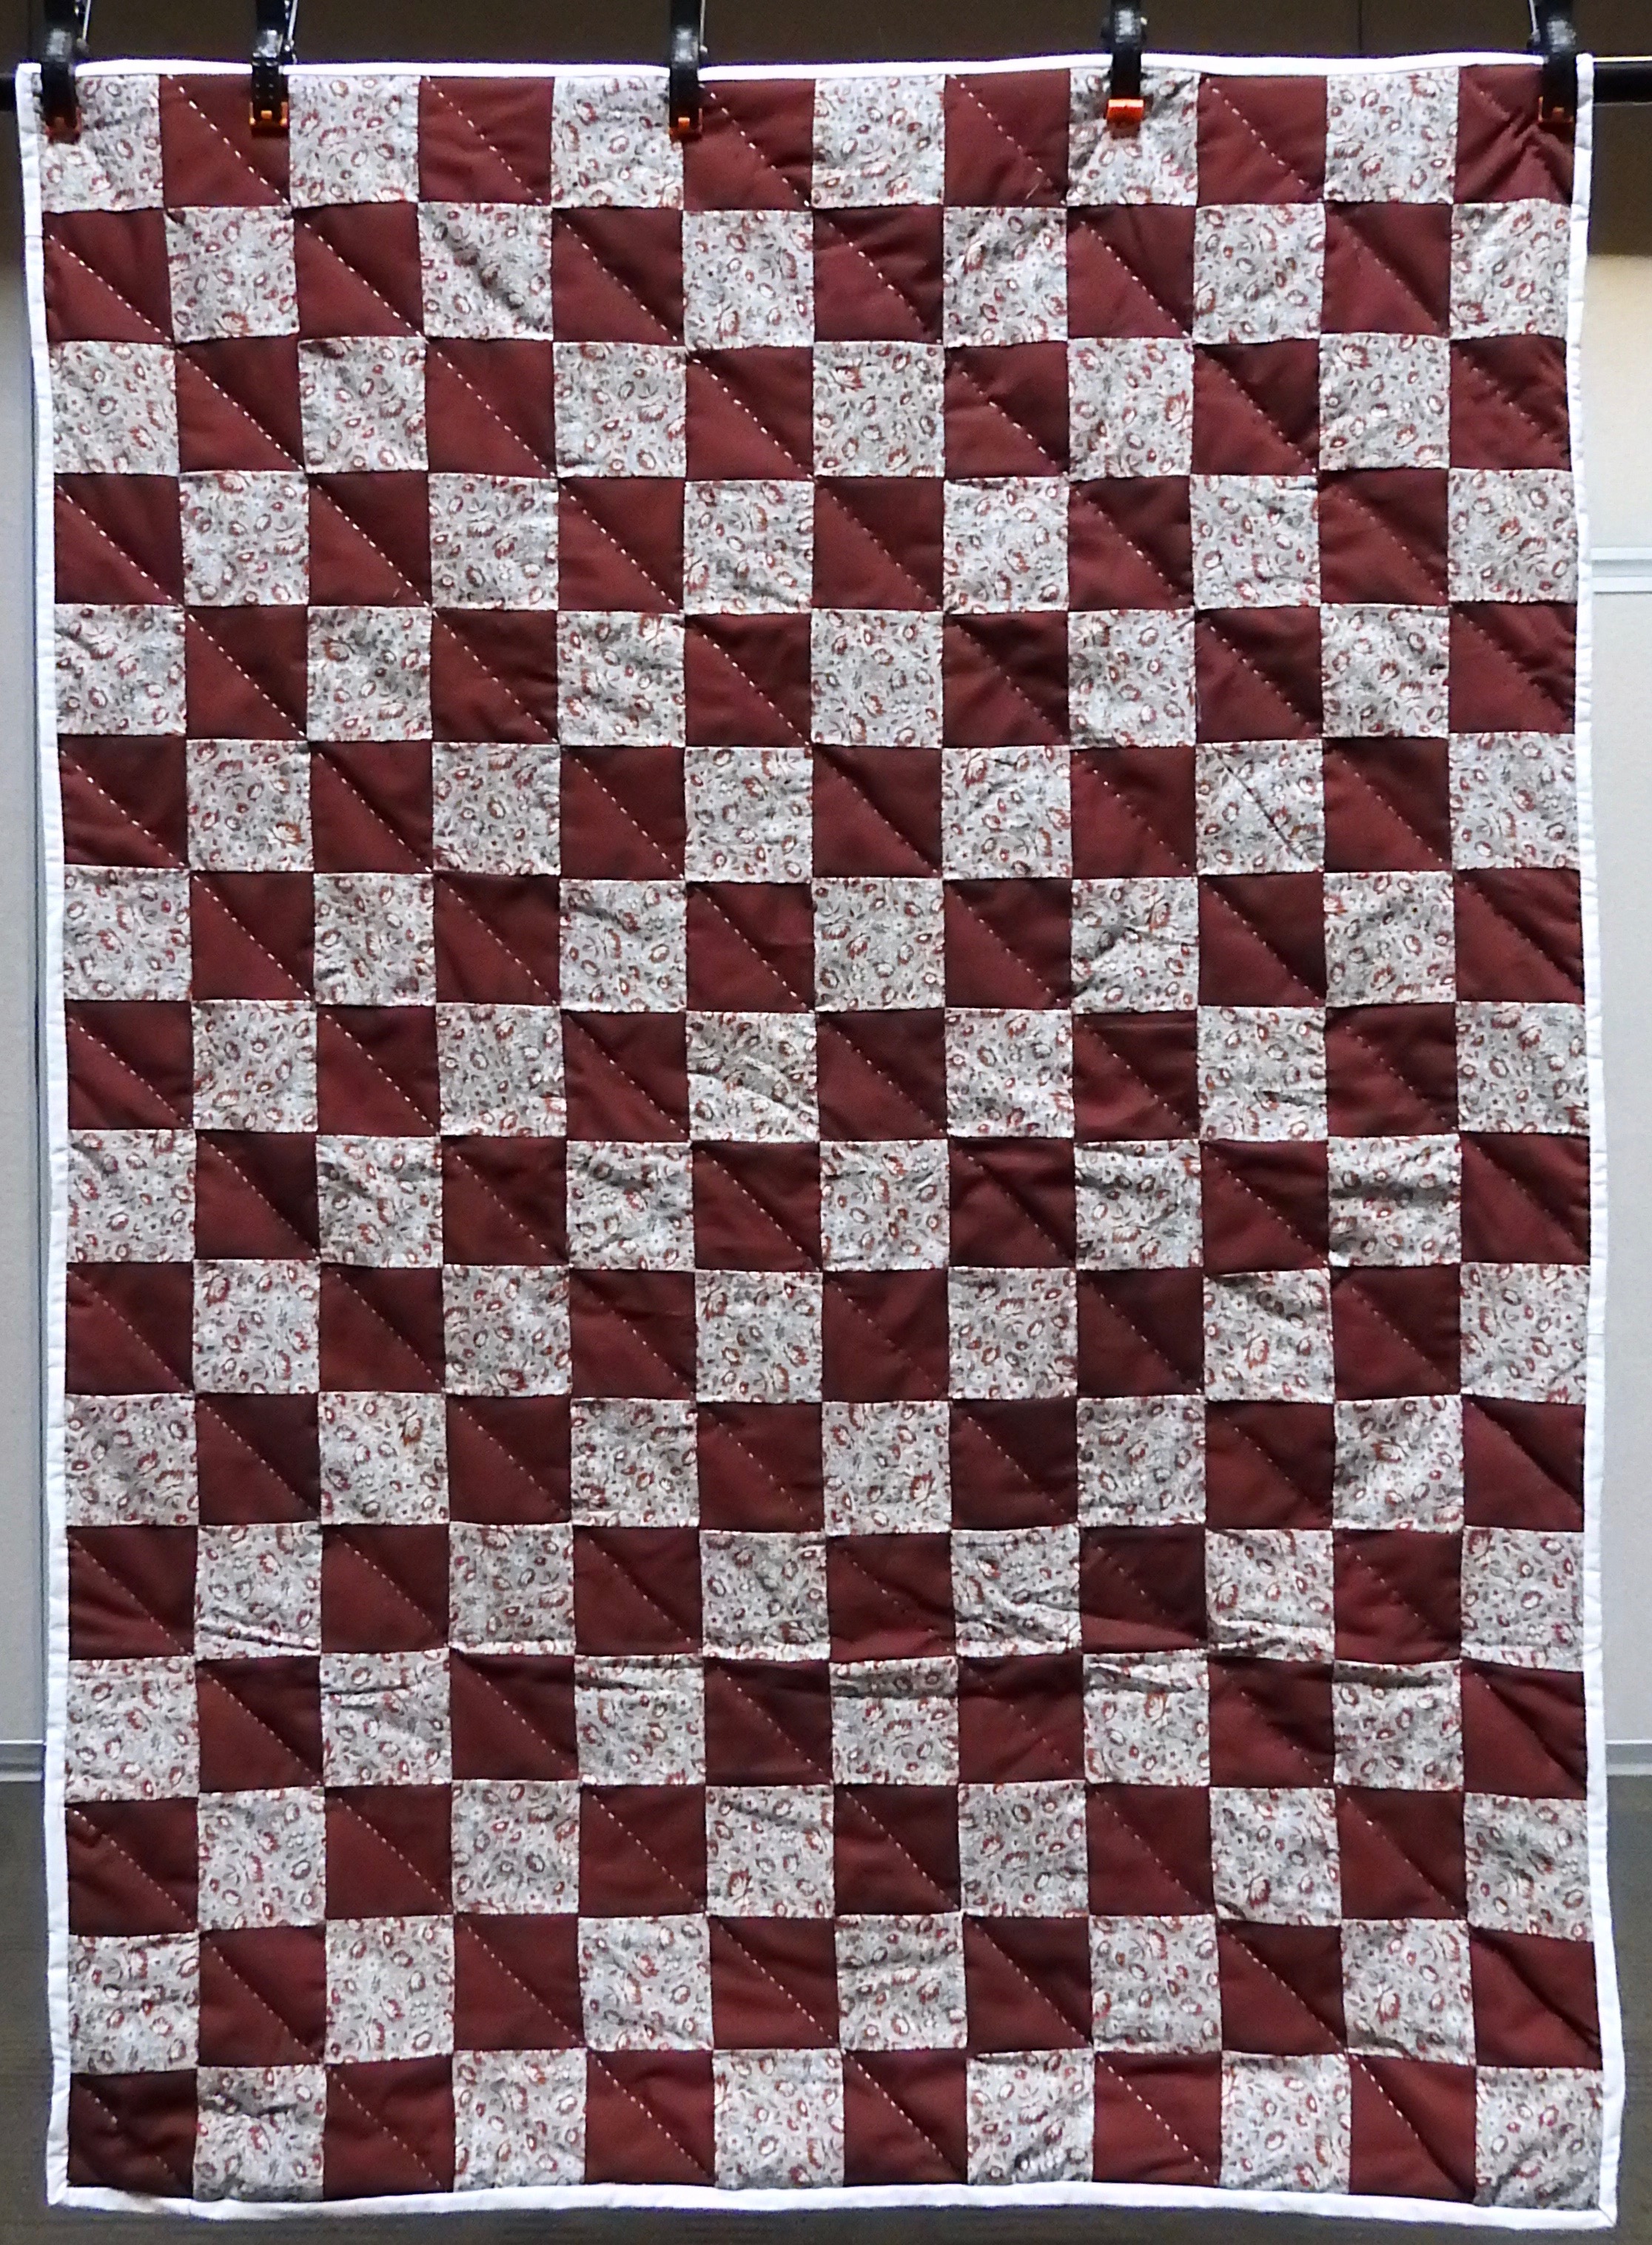  Burgundy Blocks Baby Quilt, Pieced, Long Stitch Hand Quilted, donated by First Mennonite, Middlebury, 40 x 54”